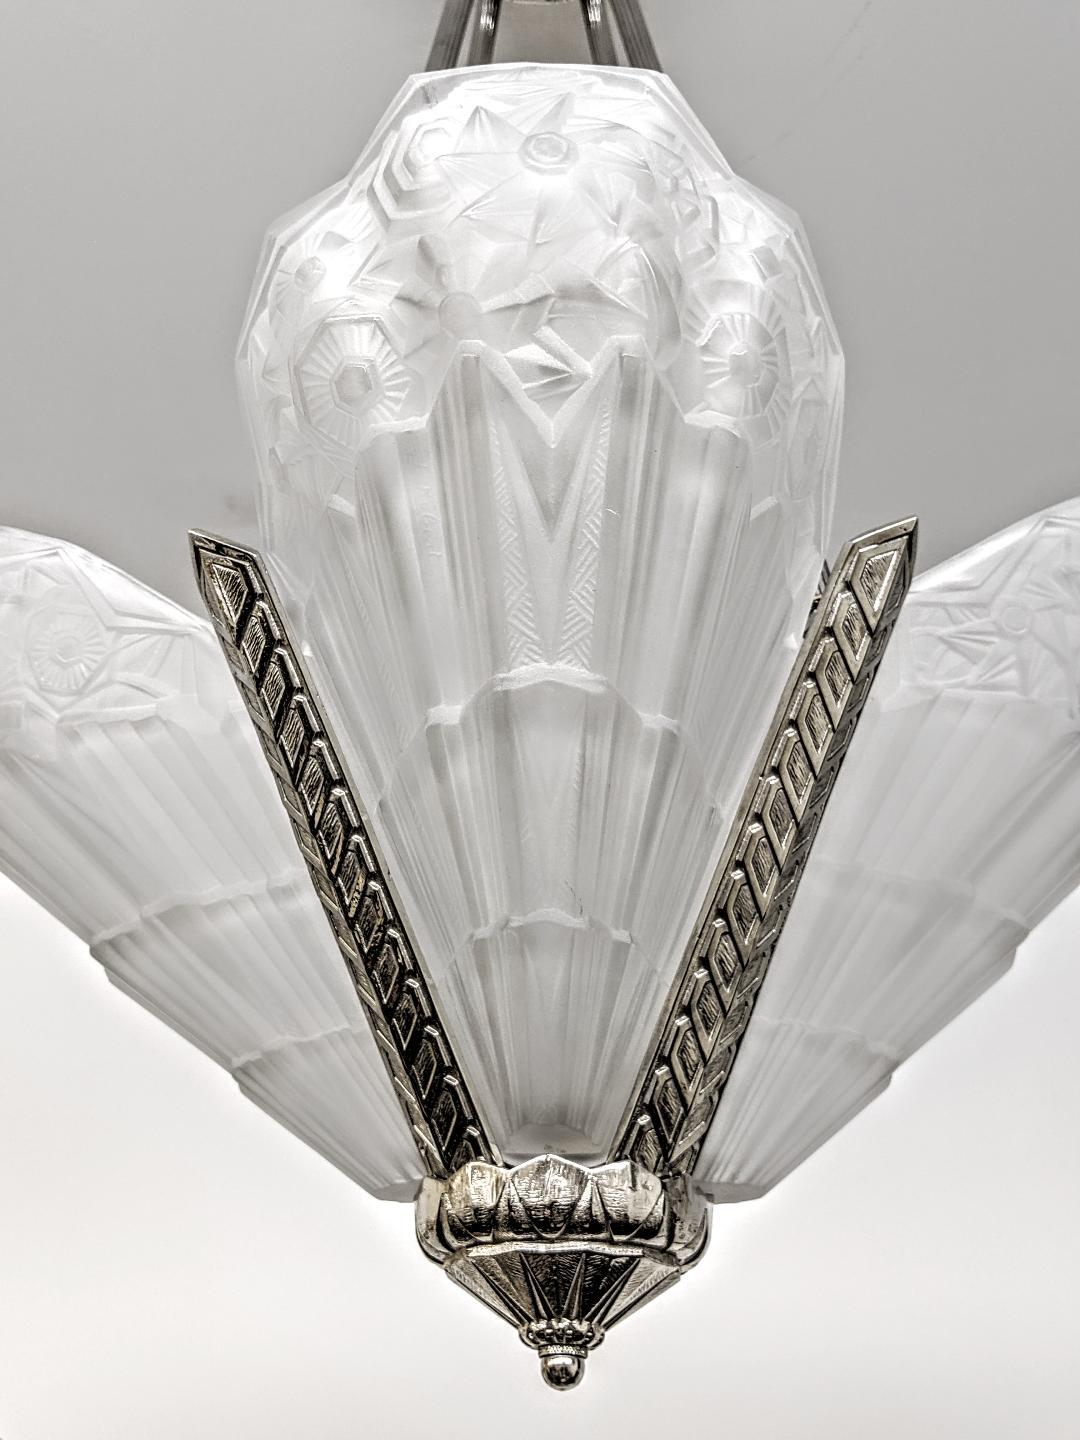 20th Century French Art Deco Pendant Chandelier Signed by J. Robert For Sale